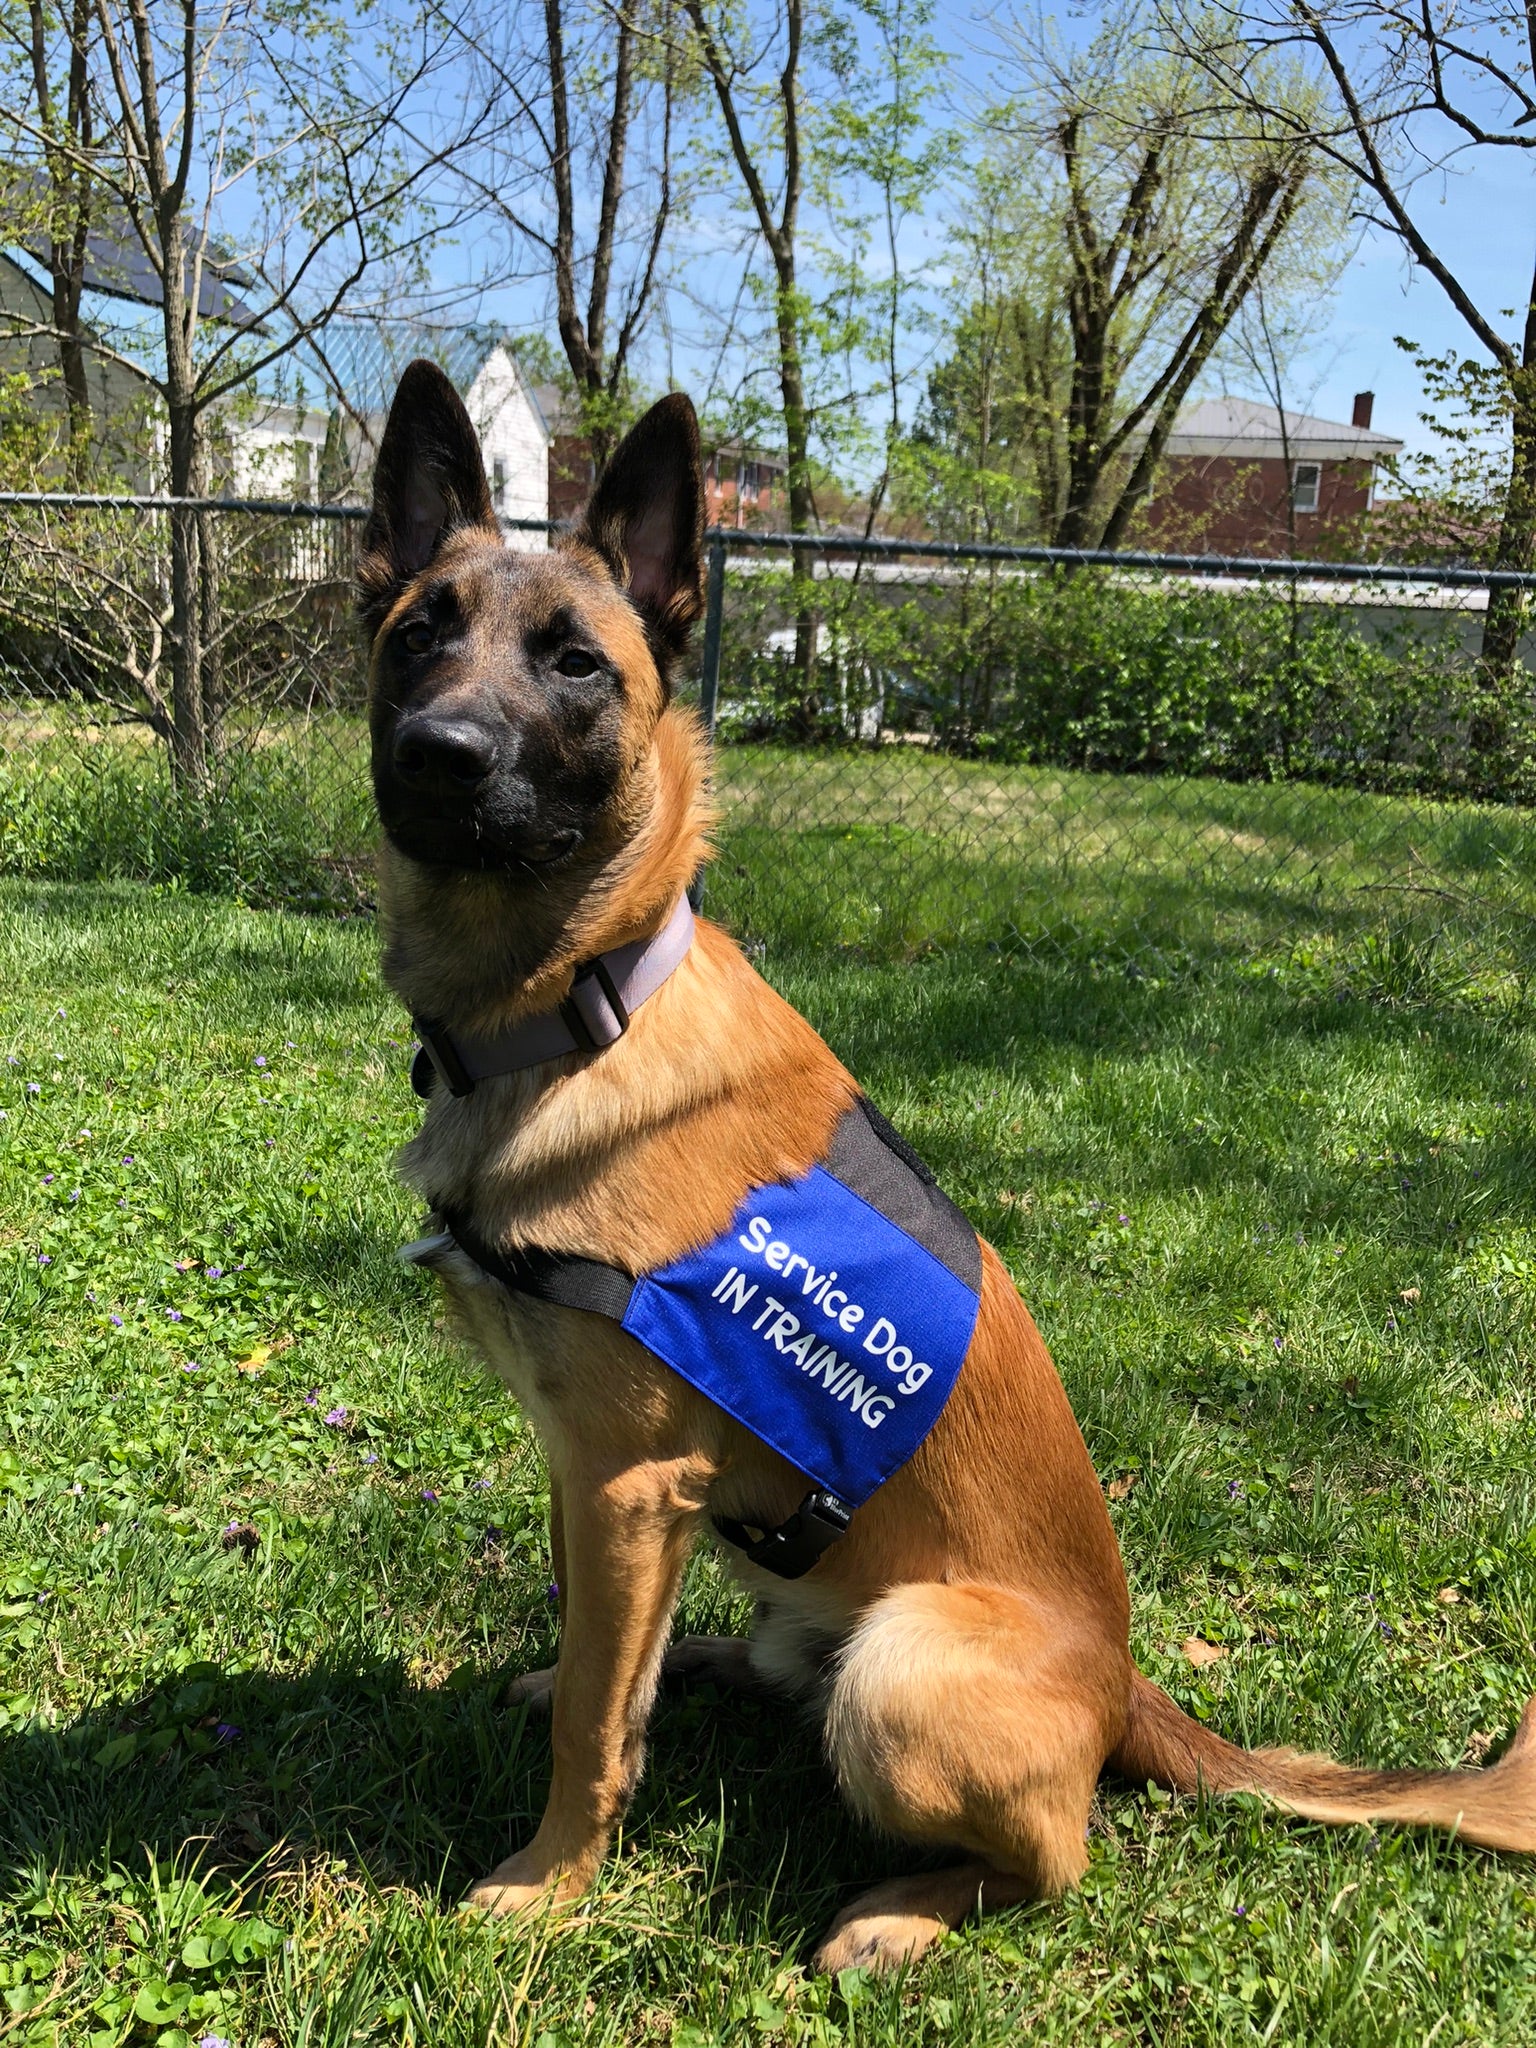 Service Dog in Training Vest: Do You Need It?